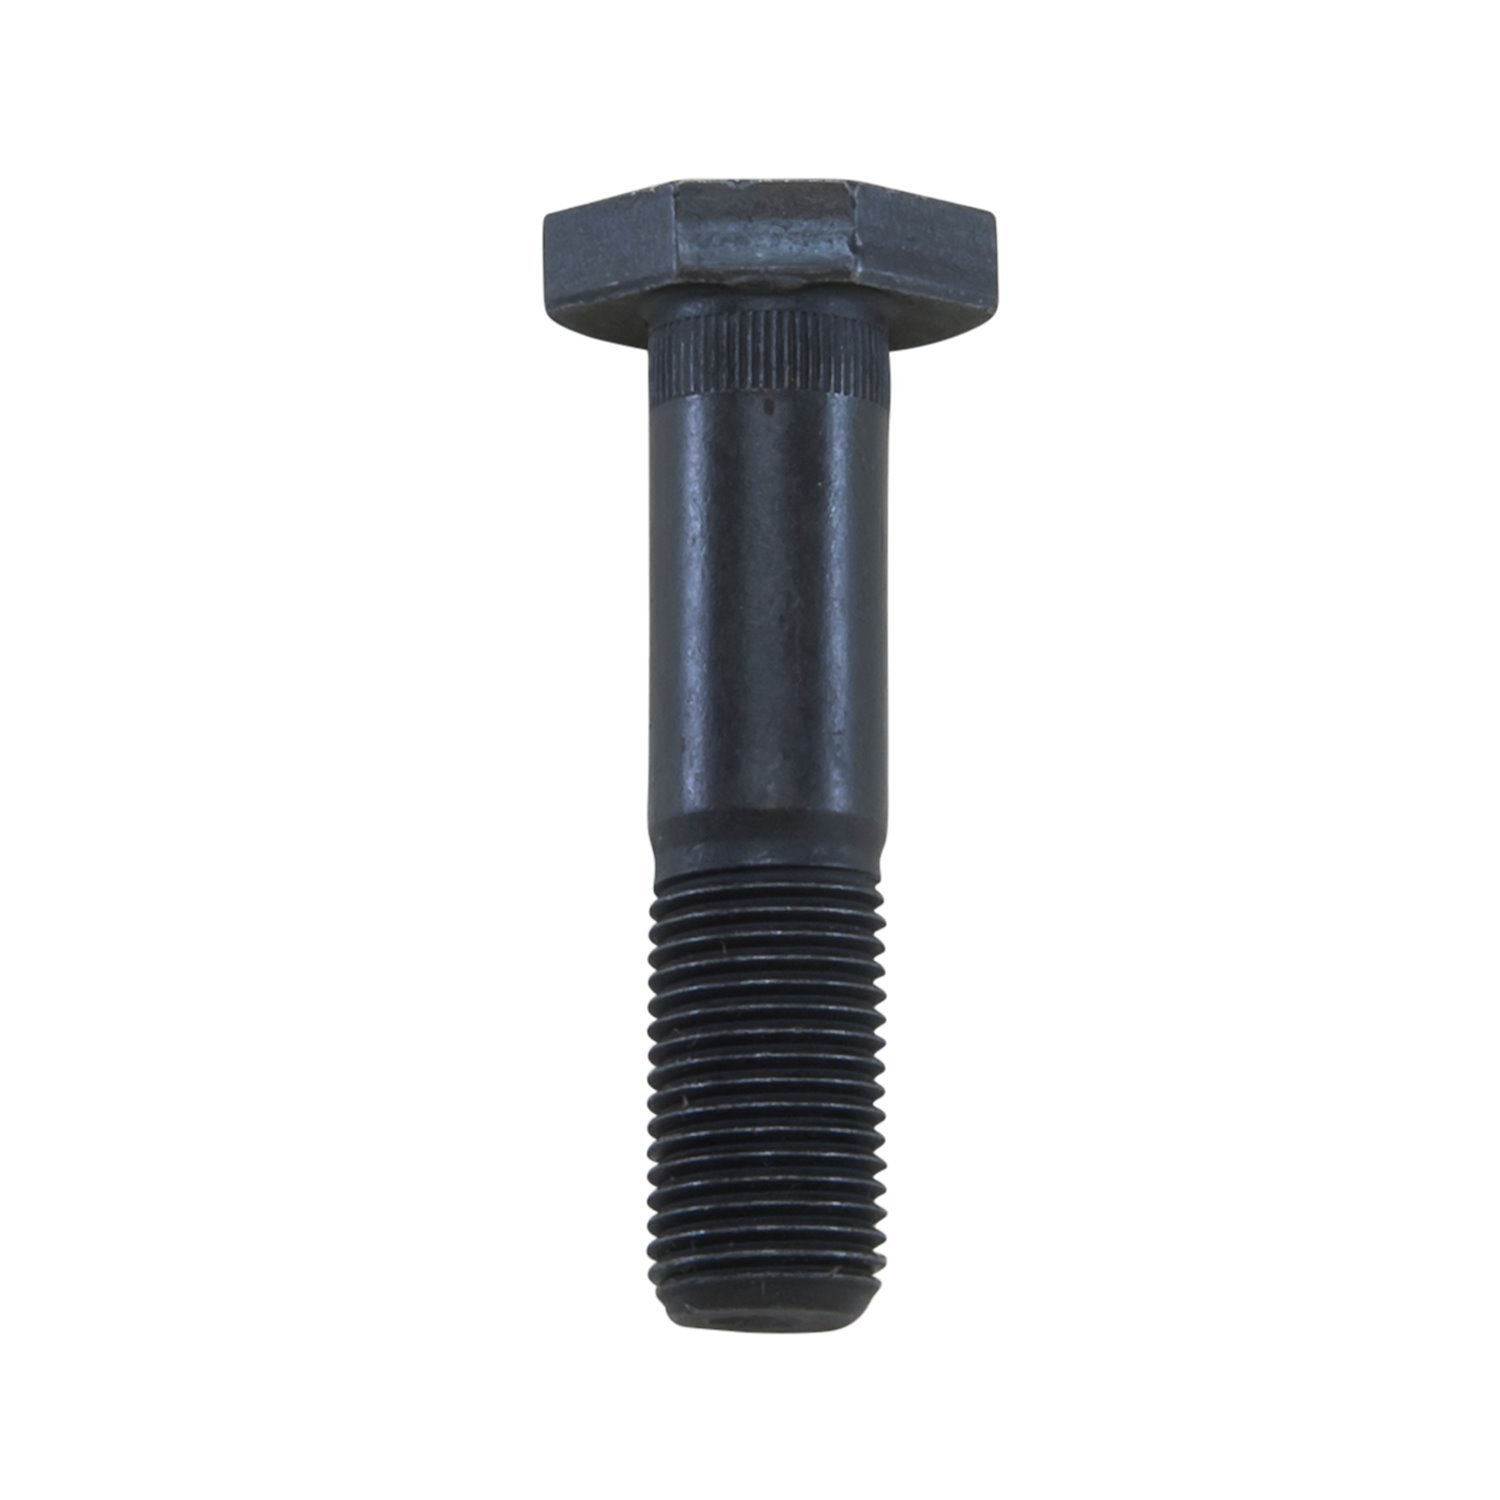 Replacement Steering Knuckle Stud For Dana 60, '79-'91